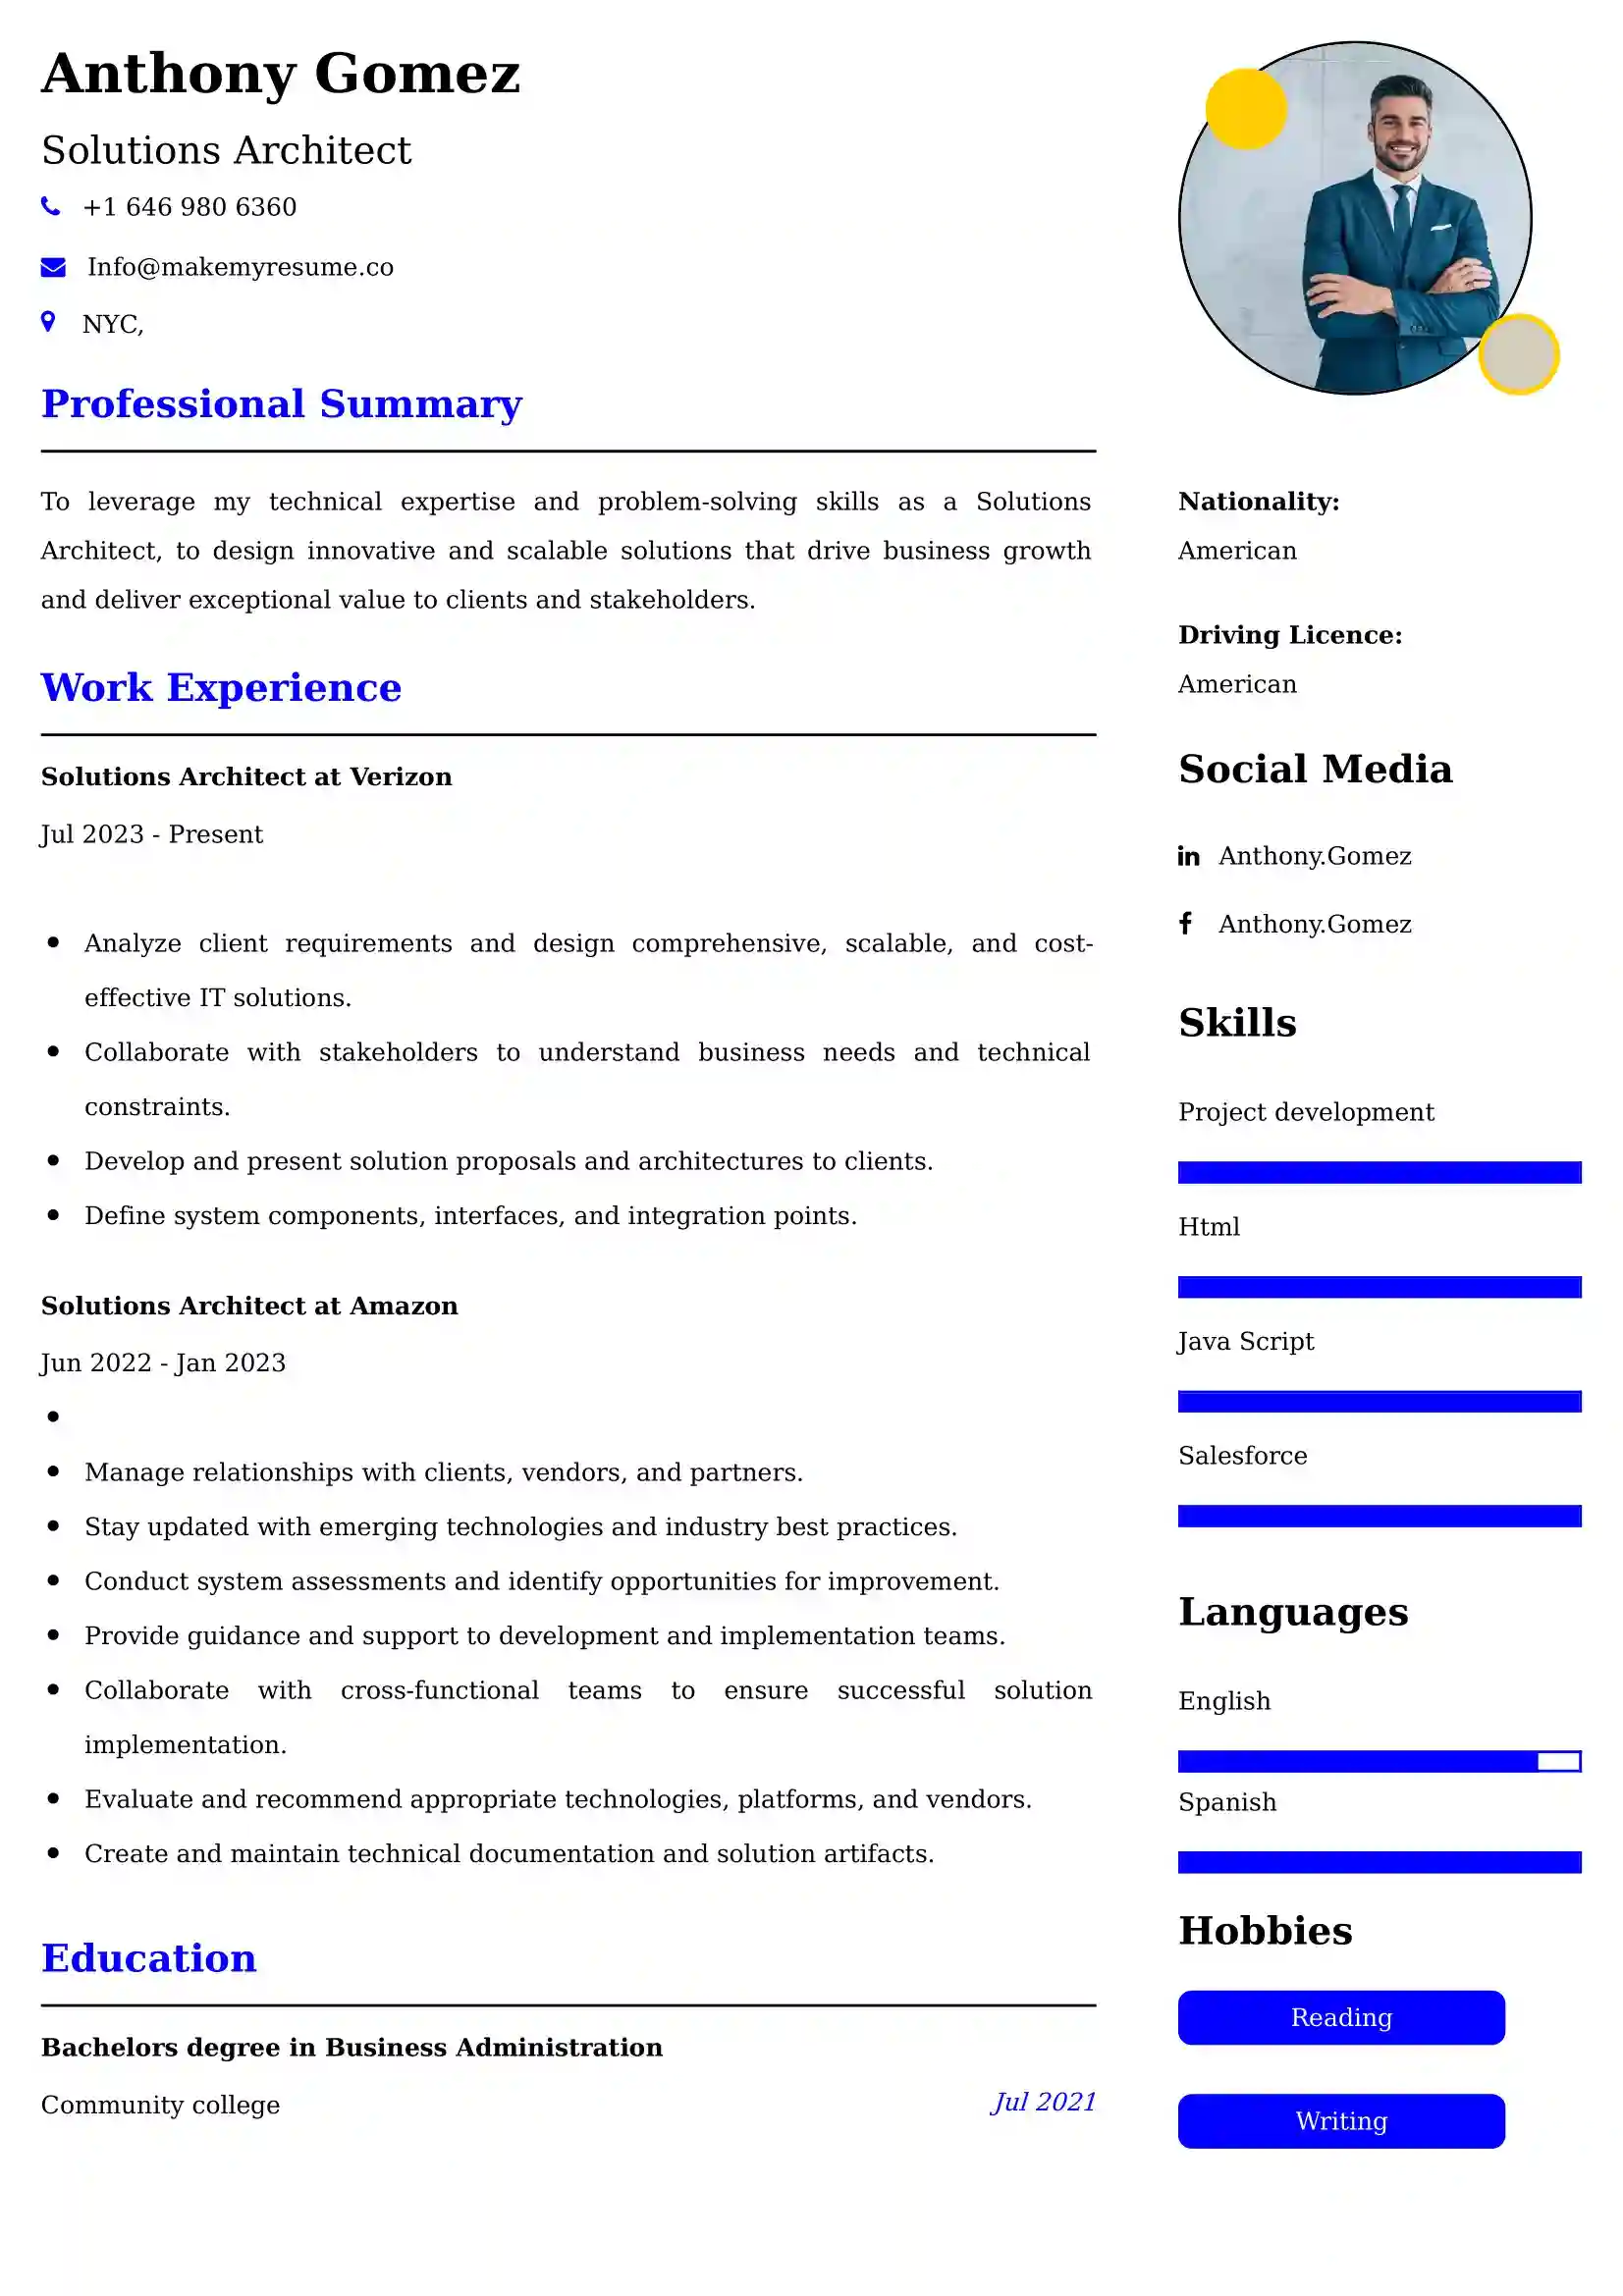 Solutions Architect Resume Examples - UK Format, Latest Template.